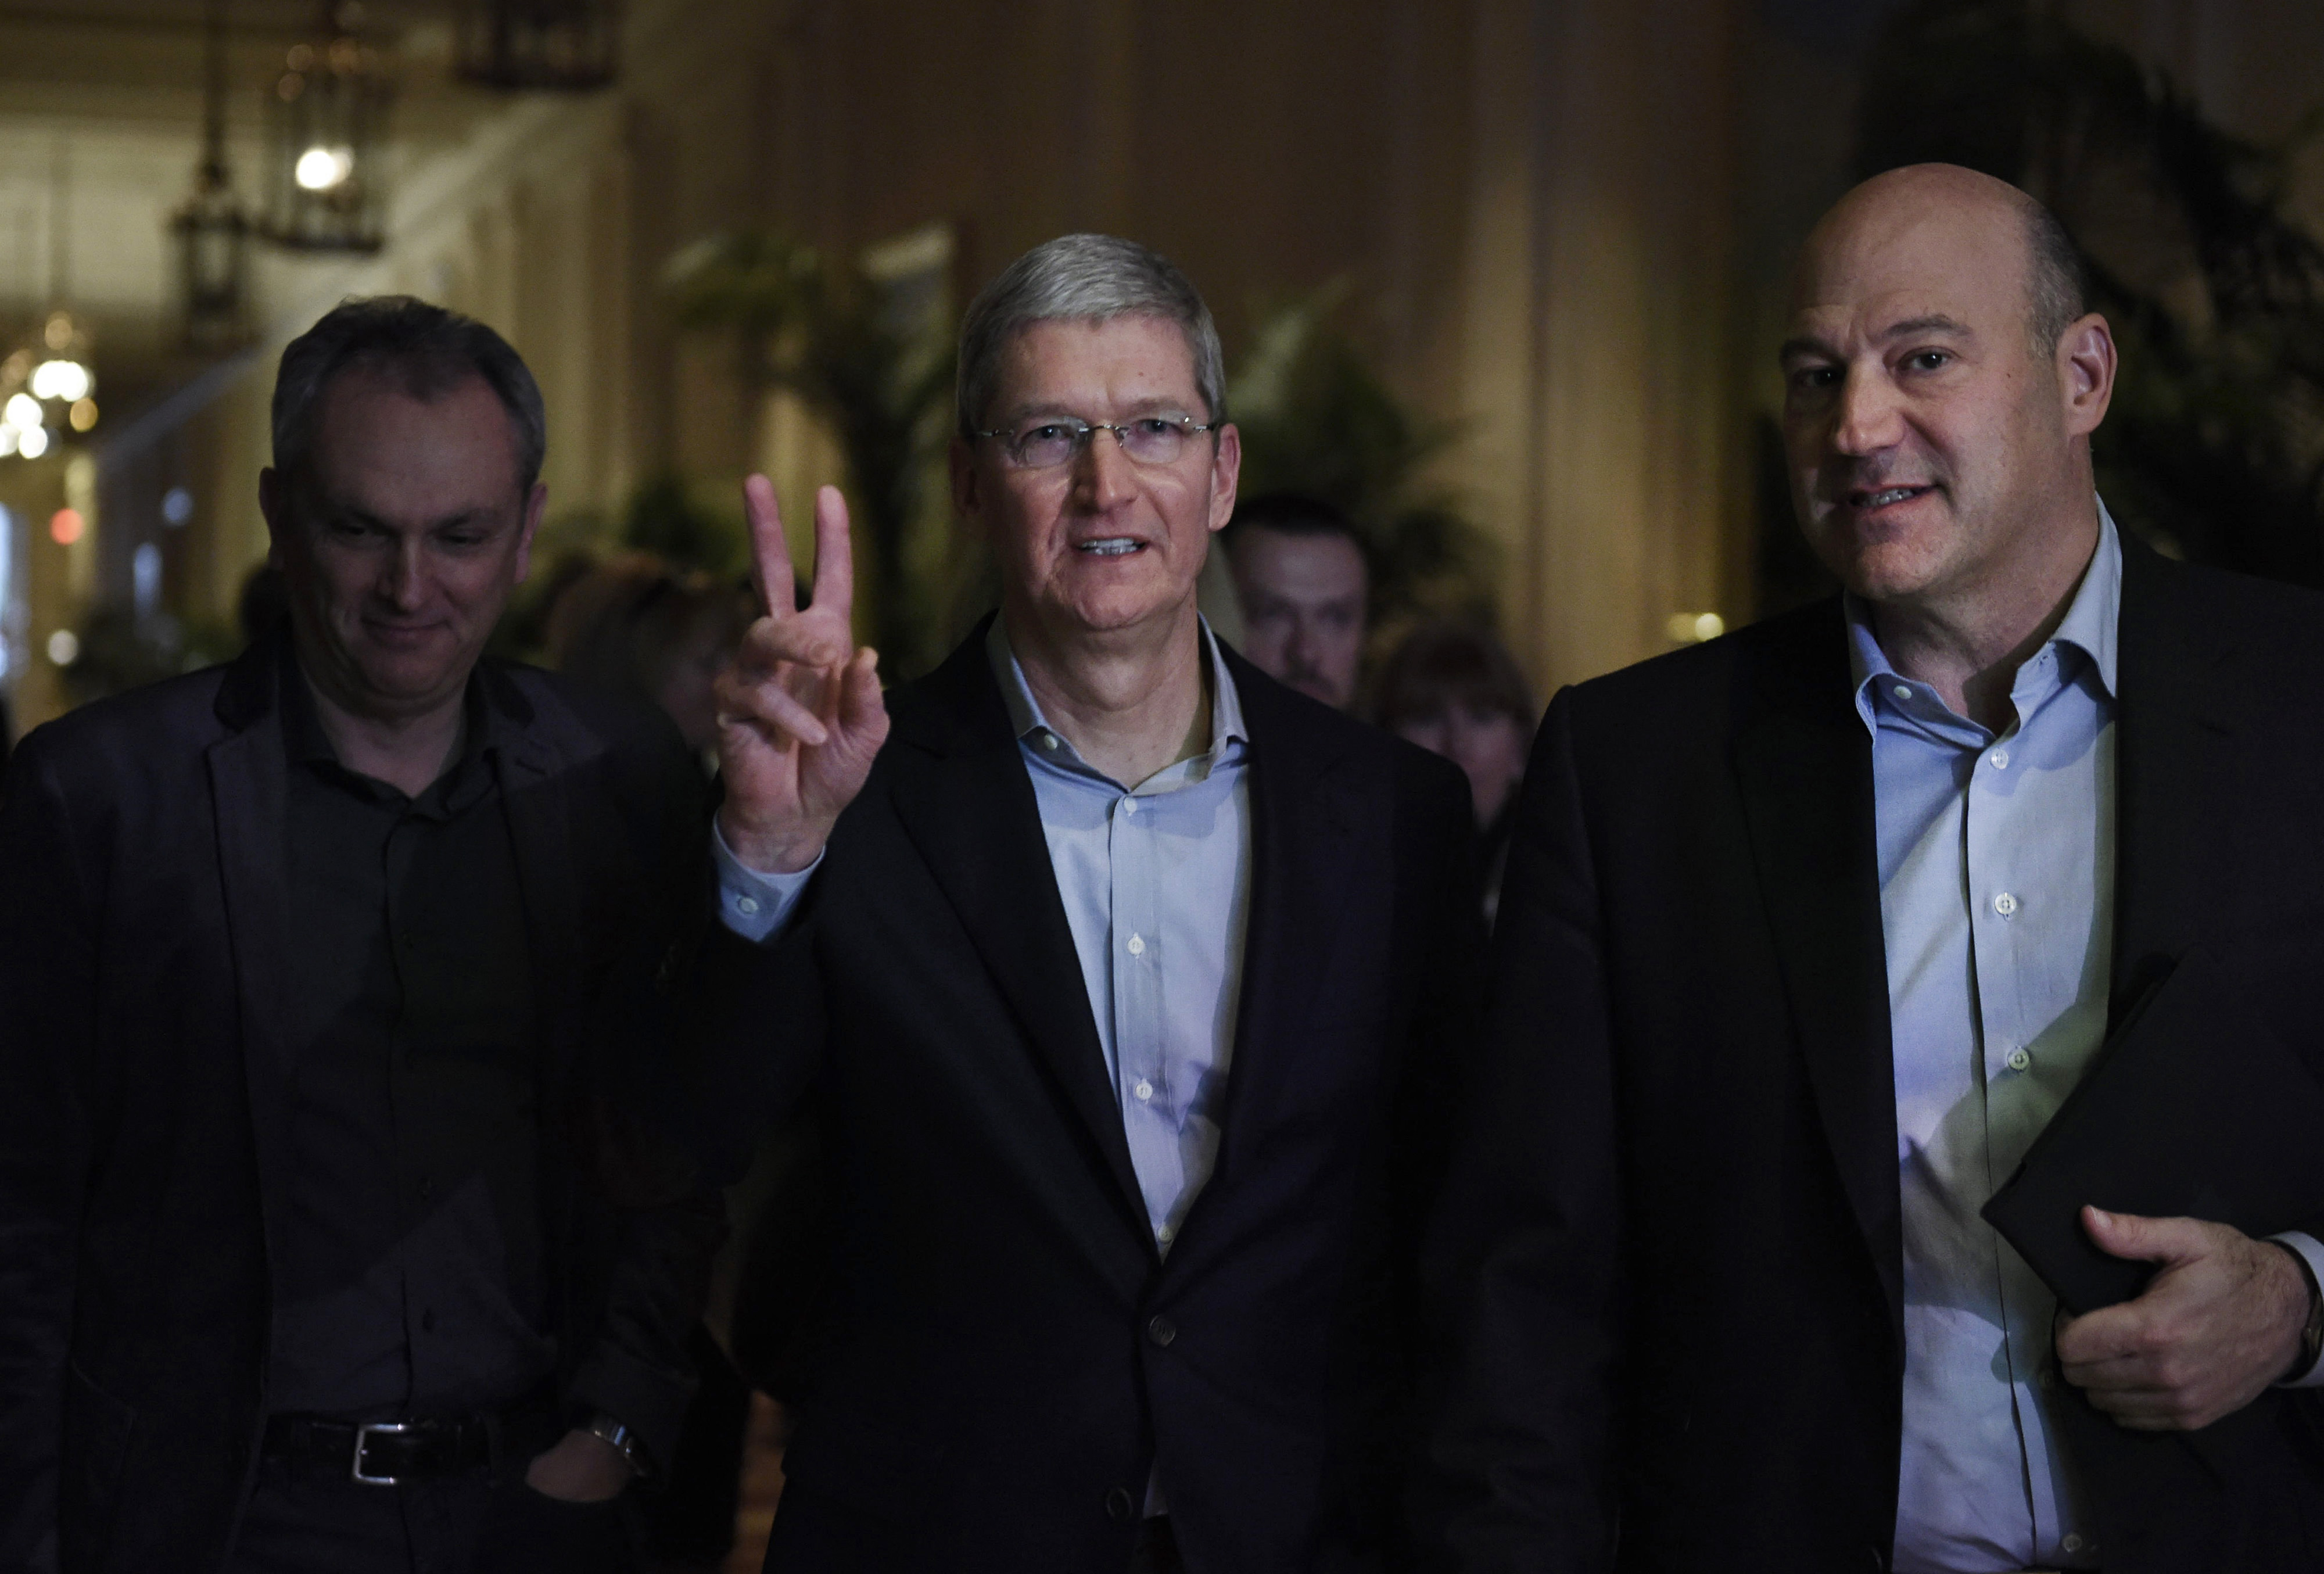 Tim Cook, chief executive officer of Apple Inc., center, arrives to speak with Gary Cohn, president and chief operating officer of Goldman Sachs Group Inc., right, at the Goldman Sachs Technology And Internet Conference in San Francisco, California, U.S., on Tuesday, Feb. 10, 2015.
